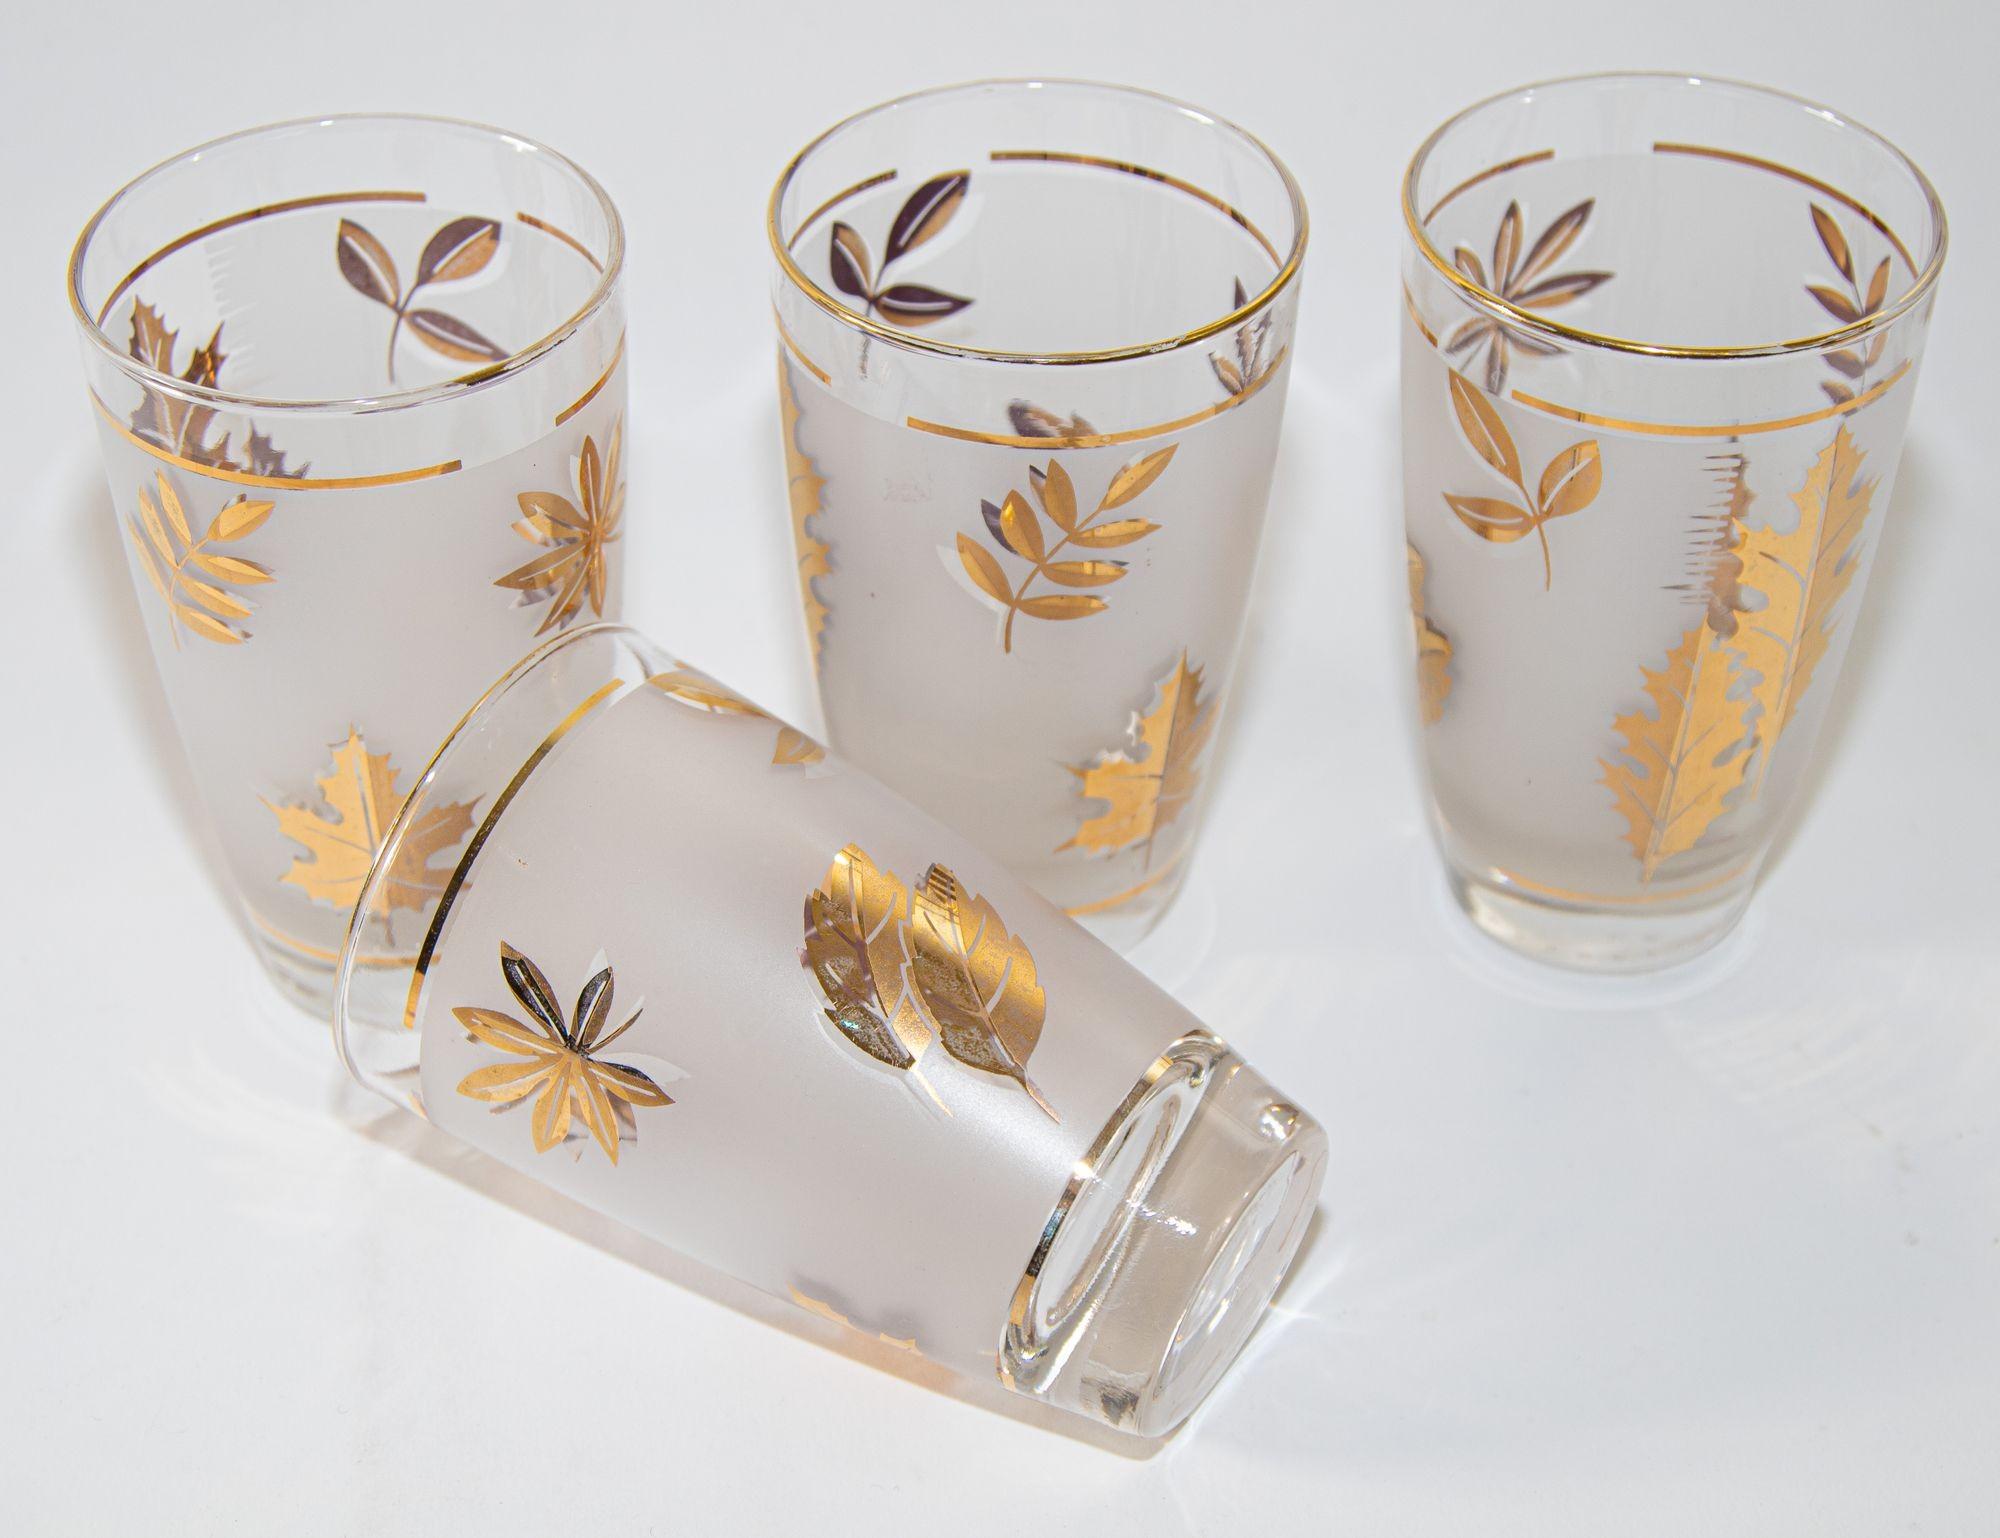 20th Century Vintage Libbey Frosted & Golden Foliage Cocktail Glasses, Set of 4 For Sale